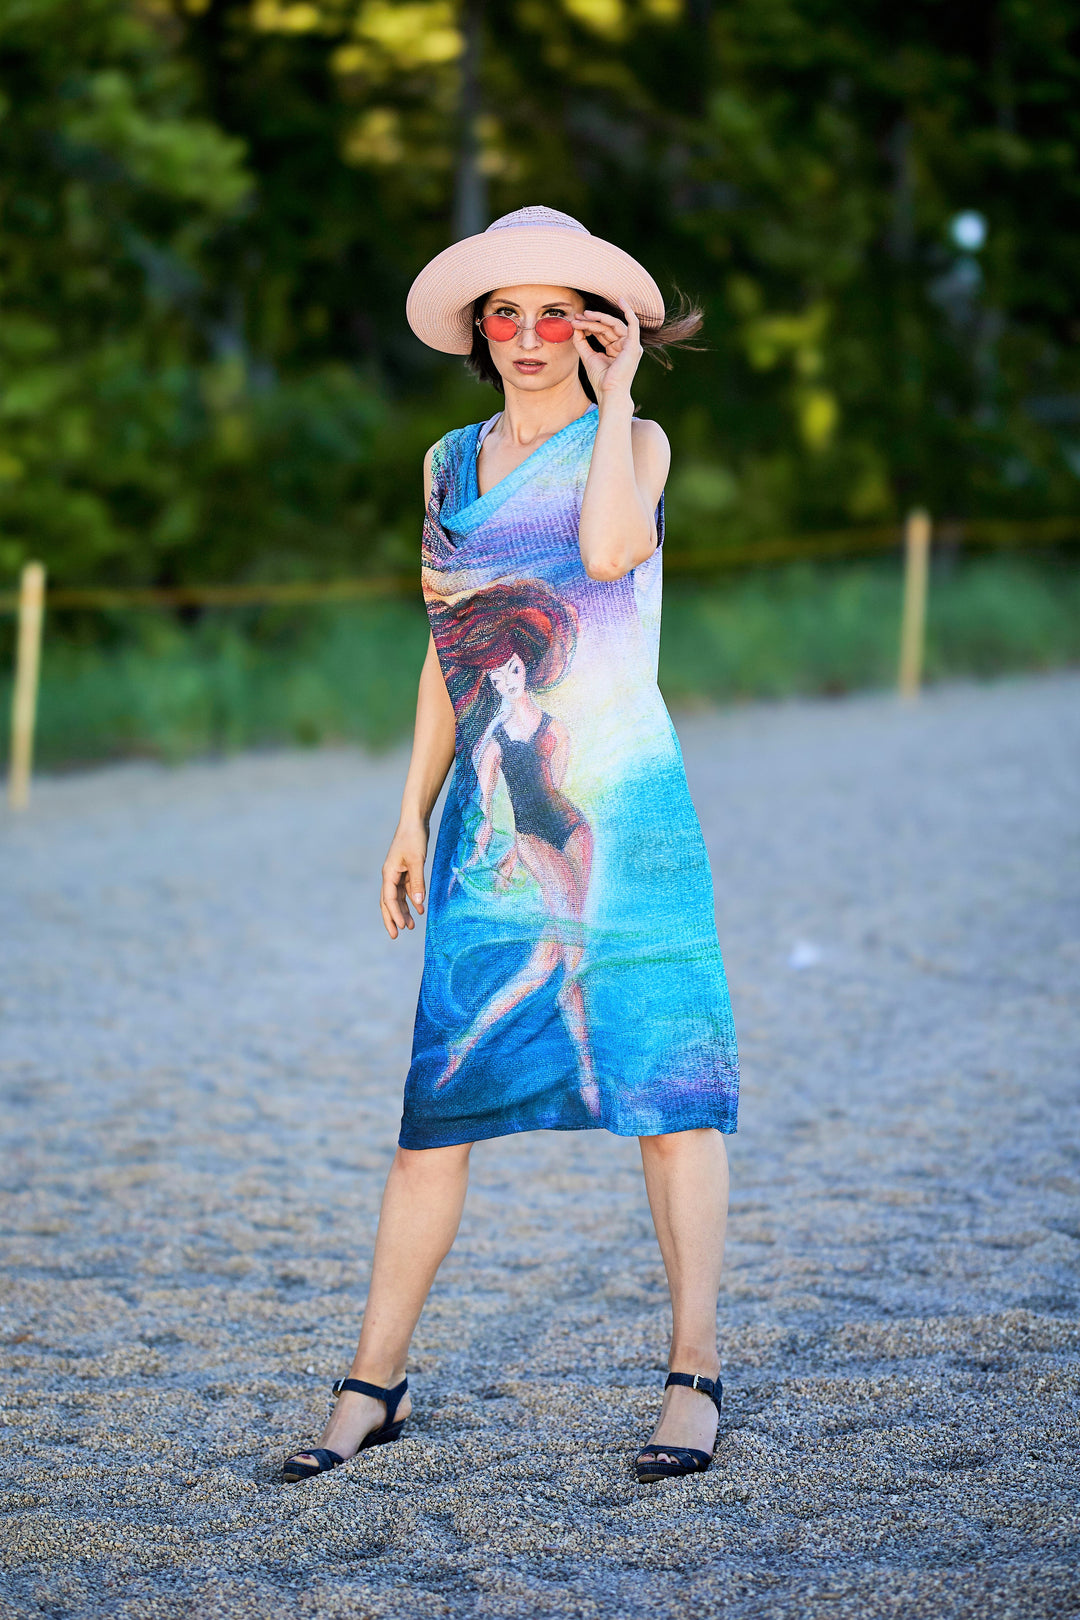 Summer Bright Midi Sleeveless Dress Wearable Art Be Grateful by artist Alesia Chaika Made In USA Featured at the Palmer House Hilton Hotel Chicago in the charity runway fashion show and artworks exhibition